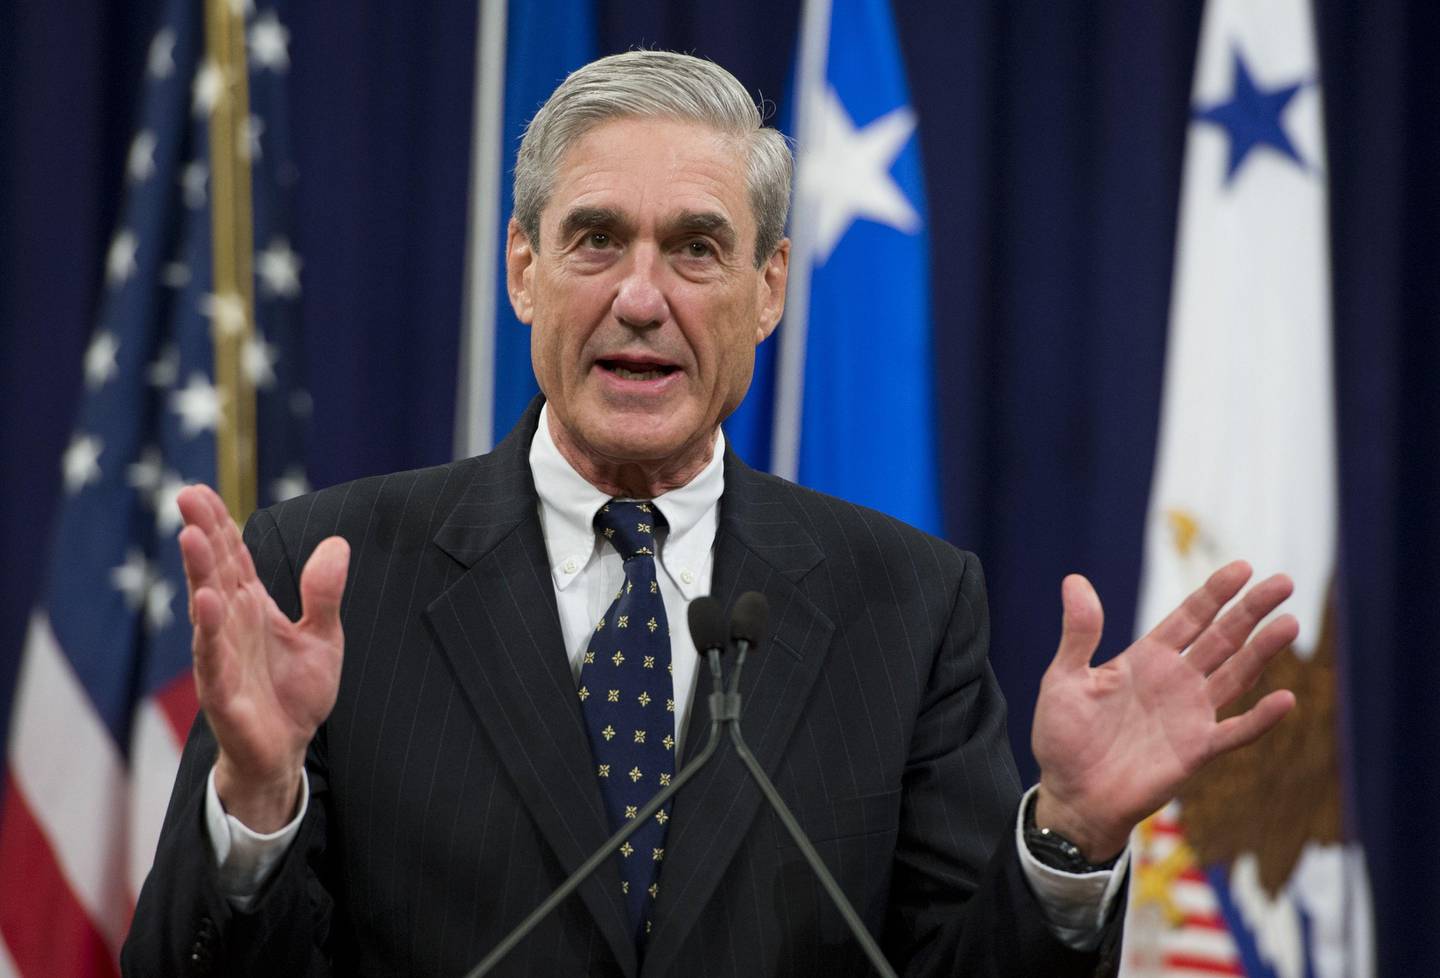 (FILES) In this file photo taken on August 1, 2013, former Federal Bureau of Investigation (FBI) Director Robert Mueller speaks during a farewell ceremony in Mueller's honor at the Department of Justice. - Donald Trump ripped into the Russia collusion probe November 7, 2018, calling it a "disgusting Witch Hunt" as the end of a two-month election hiatus freed Special Counsel Robert Mueller to resume issuing indictments and pressing for the president himself to answer questions. The end of a Justice Department quiet period for the probe was expected to open the door for Trump's nemesis to resume filing charges and issuing subpoenas, with the president widely believed under investigation for possible obstruction of justice. (Photo by Saul LOEB / AFP)